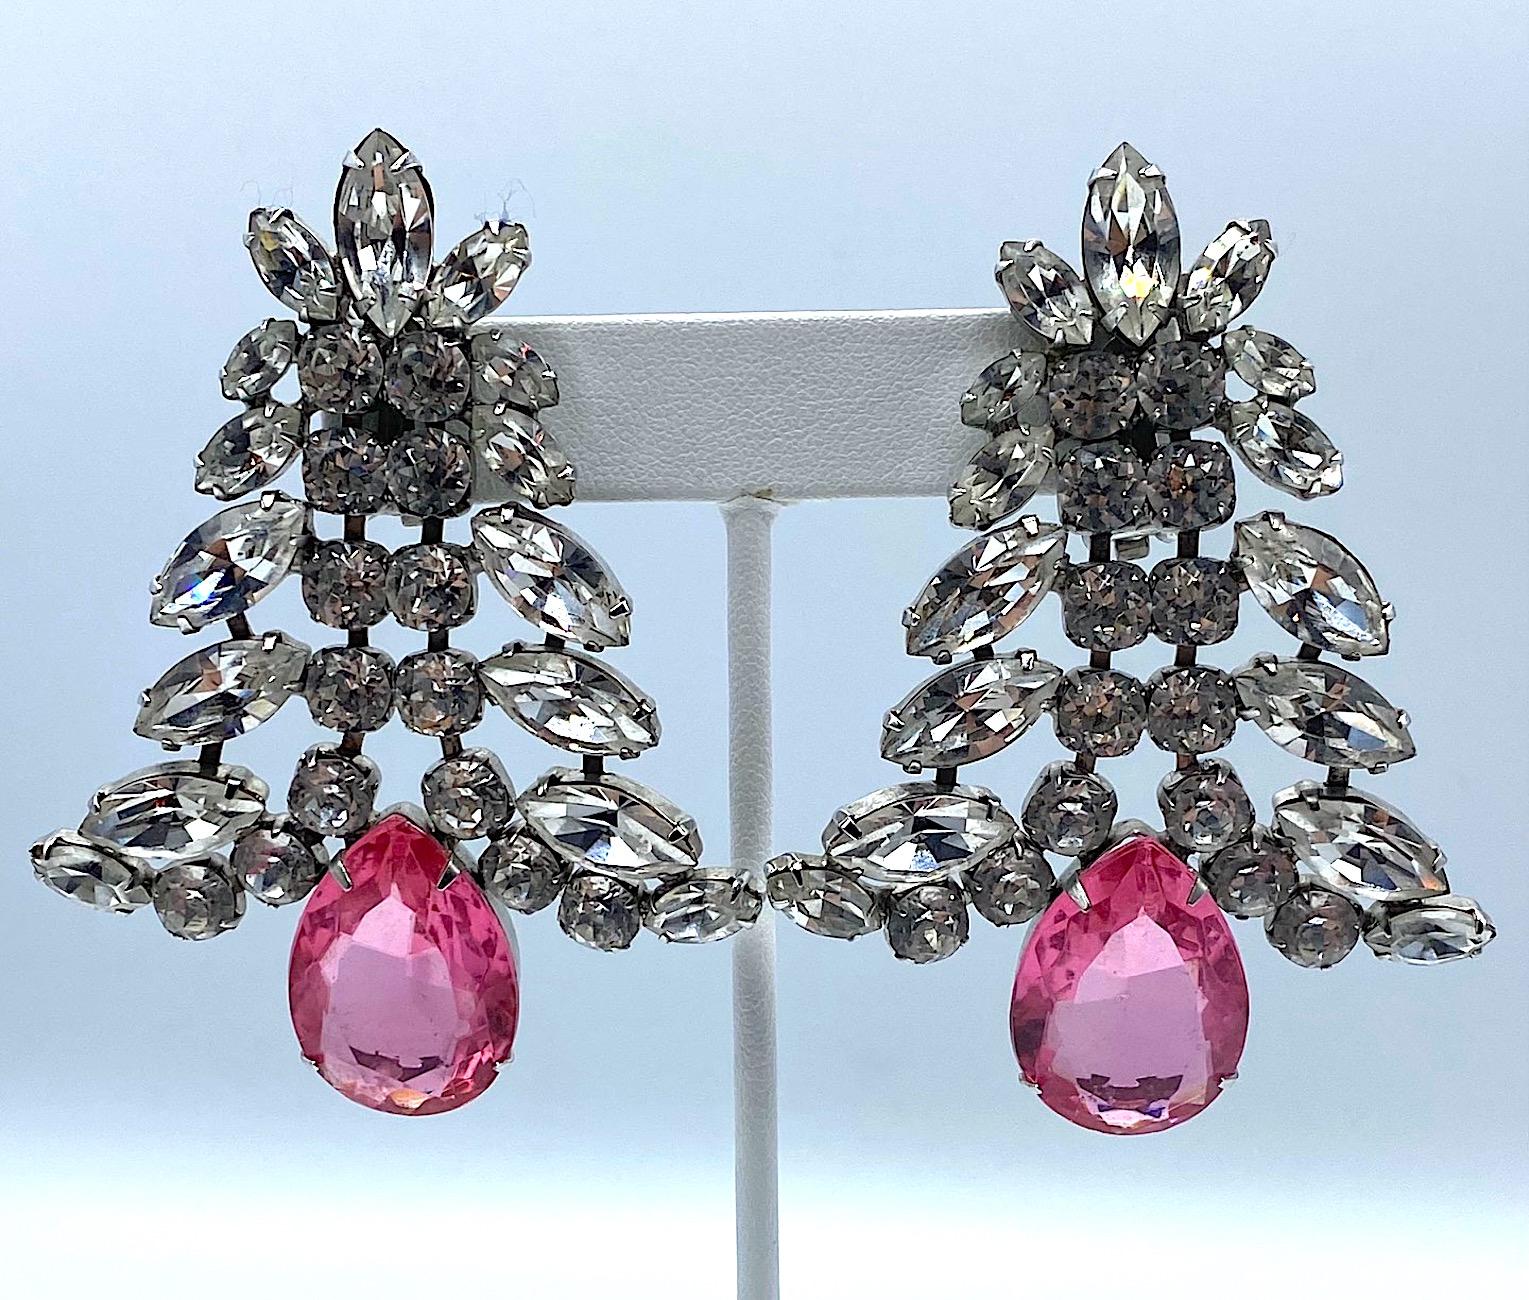 A fabulous pair of large rhodium plated and rhinestone set earrings with pink crystal stone. The earrings are set with round rhinestones along the center with various size marquise shape rhinestones along the top sides forming a bell shape. The